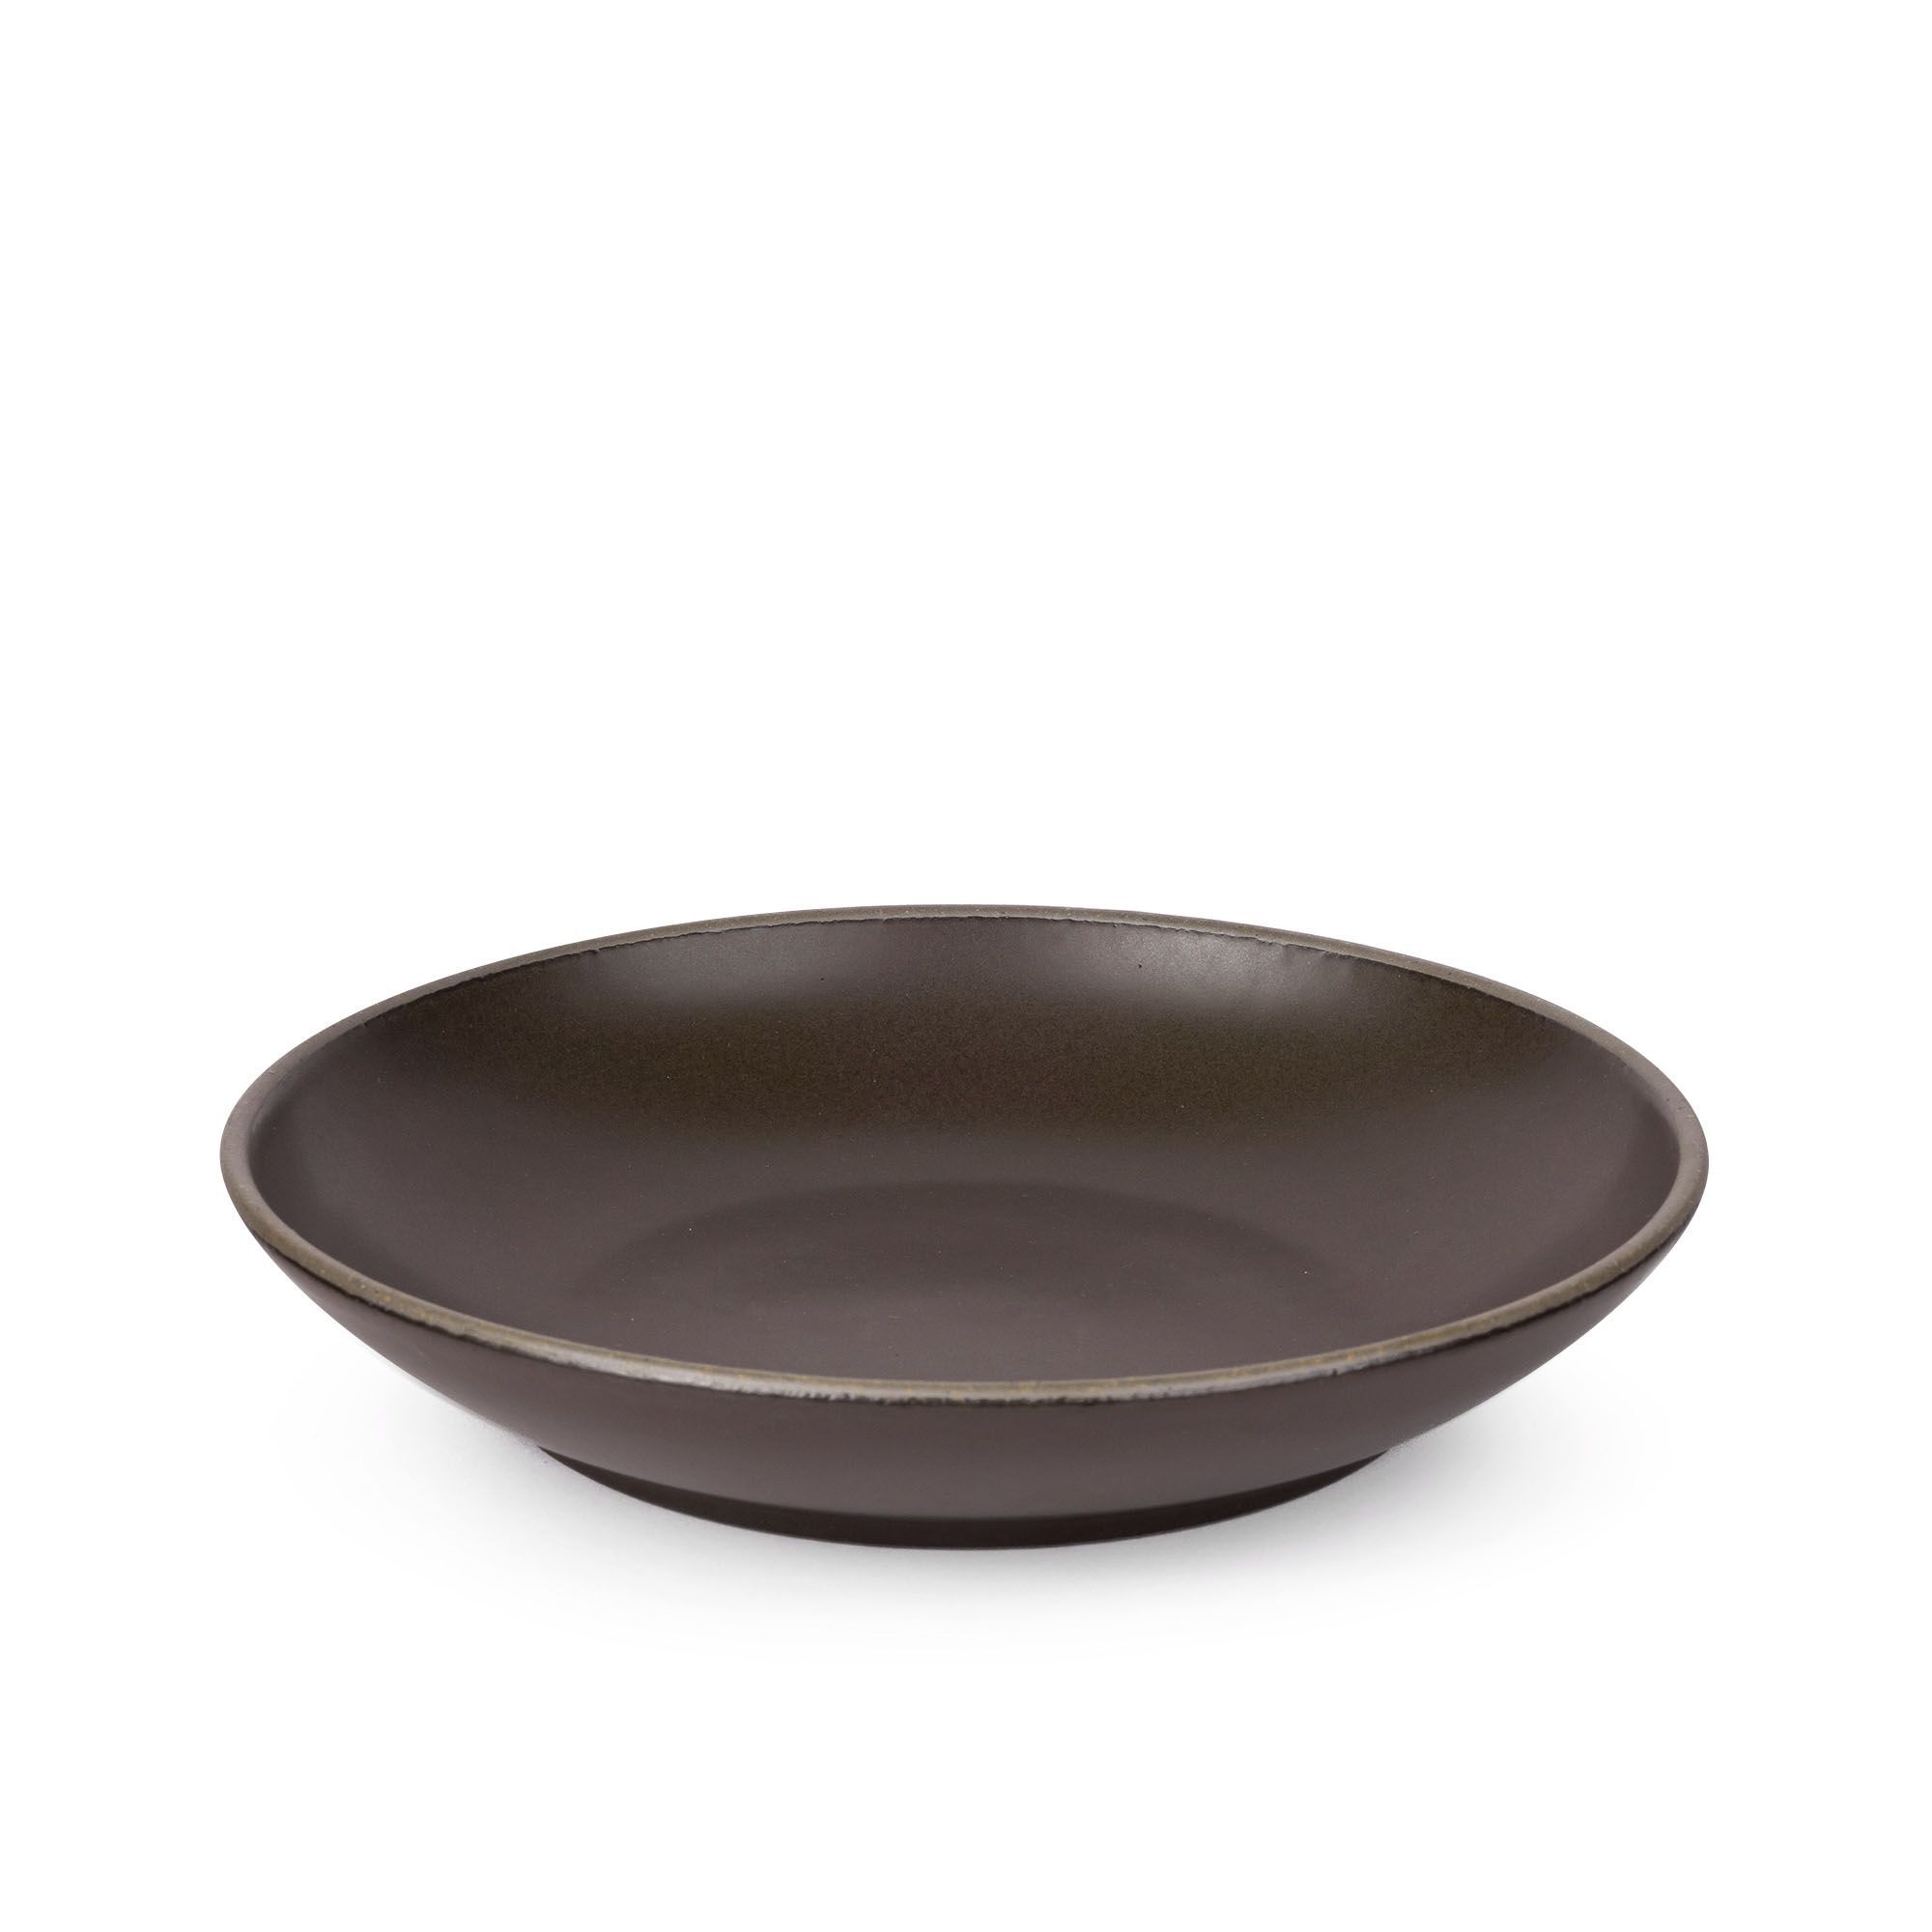 A large ceramic plate with a curved bowl edge in a dark cool brown color featuring iron speckles and an unglazed rim.